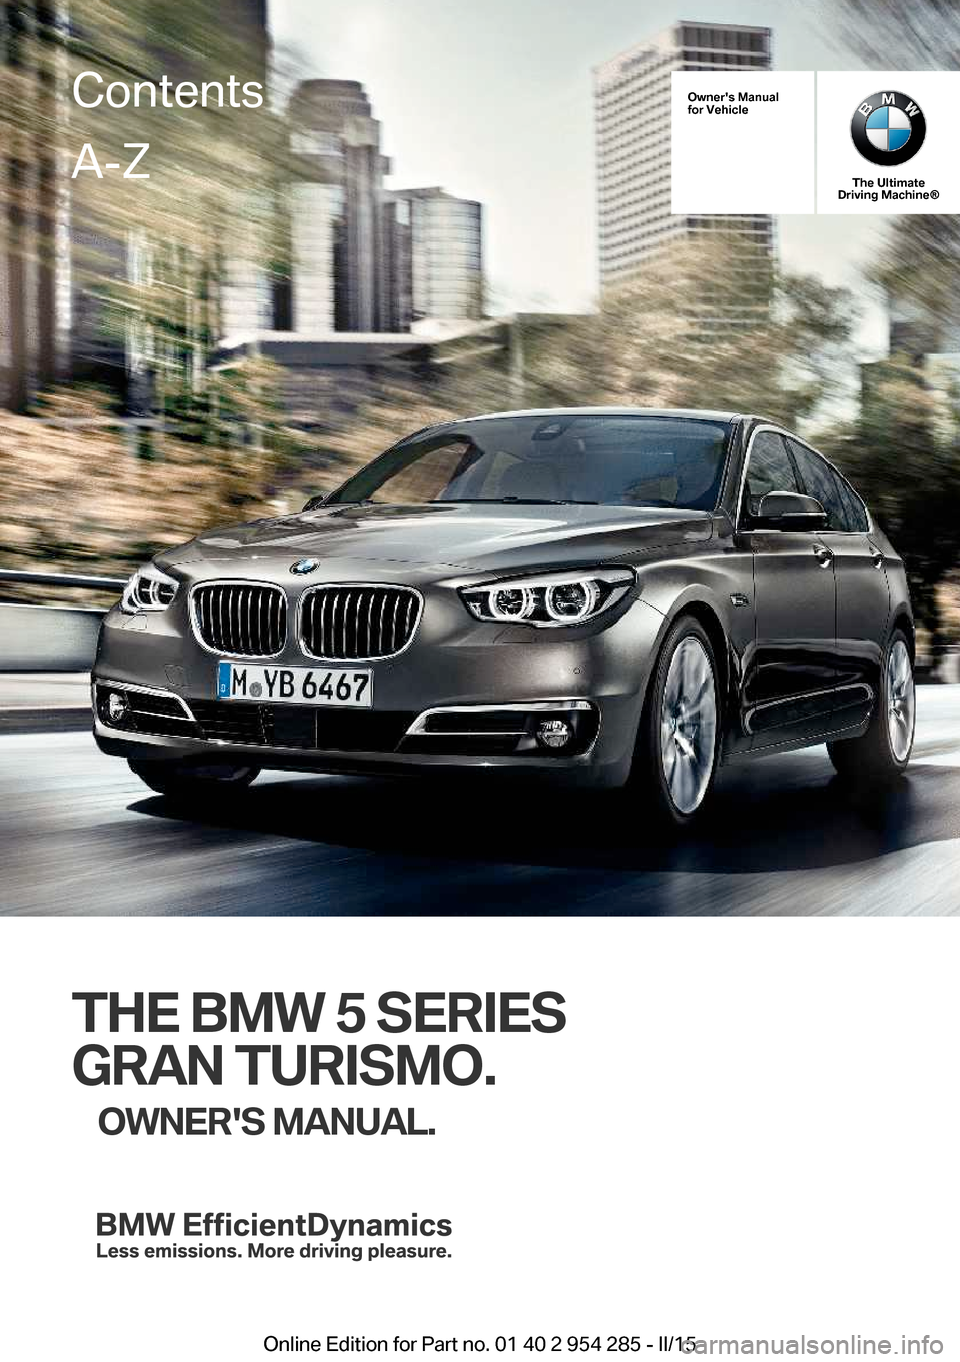 BMW 5 SERIES GRAN TURISMO 2016 F07 Owners Manual Owners Manual
for Vehicle
The Ultimate
Driving Machine®
THE BMW 5 SERIES
GRAN TURISMO. OWNERS MANUAL.
ContentsA-Z
Online Edition for Part no. 01 40 2 954 285 - II/15   